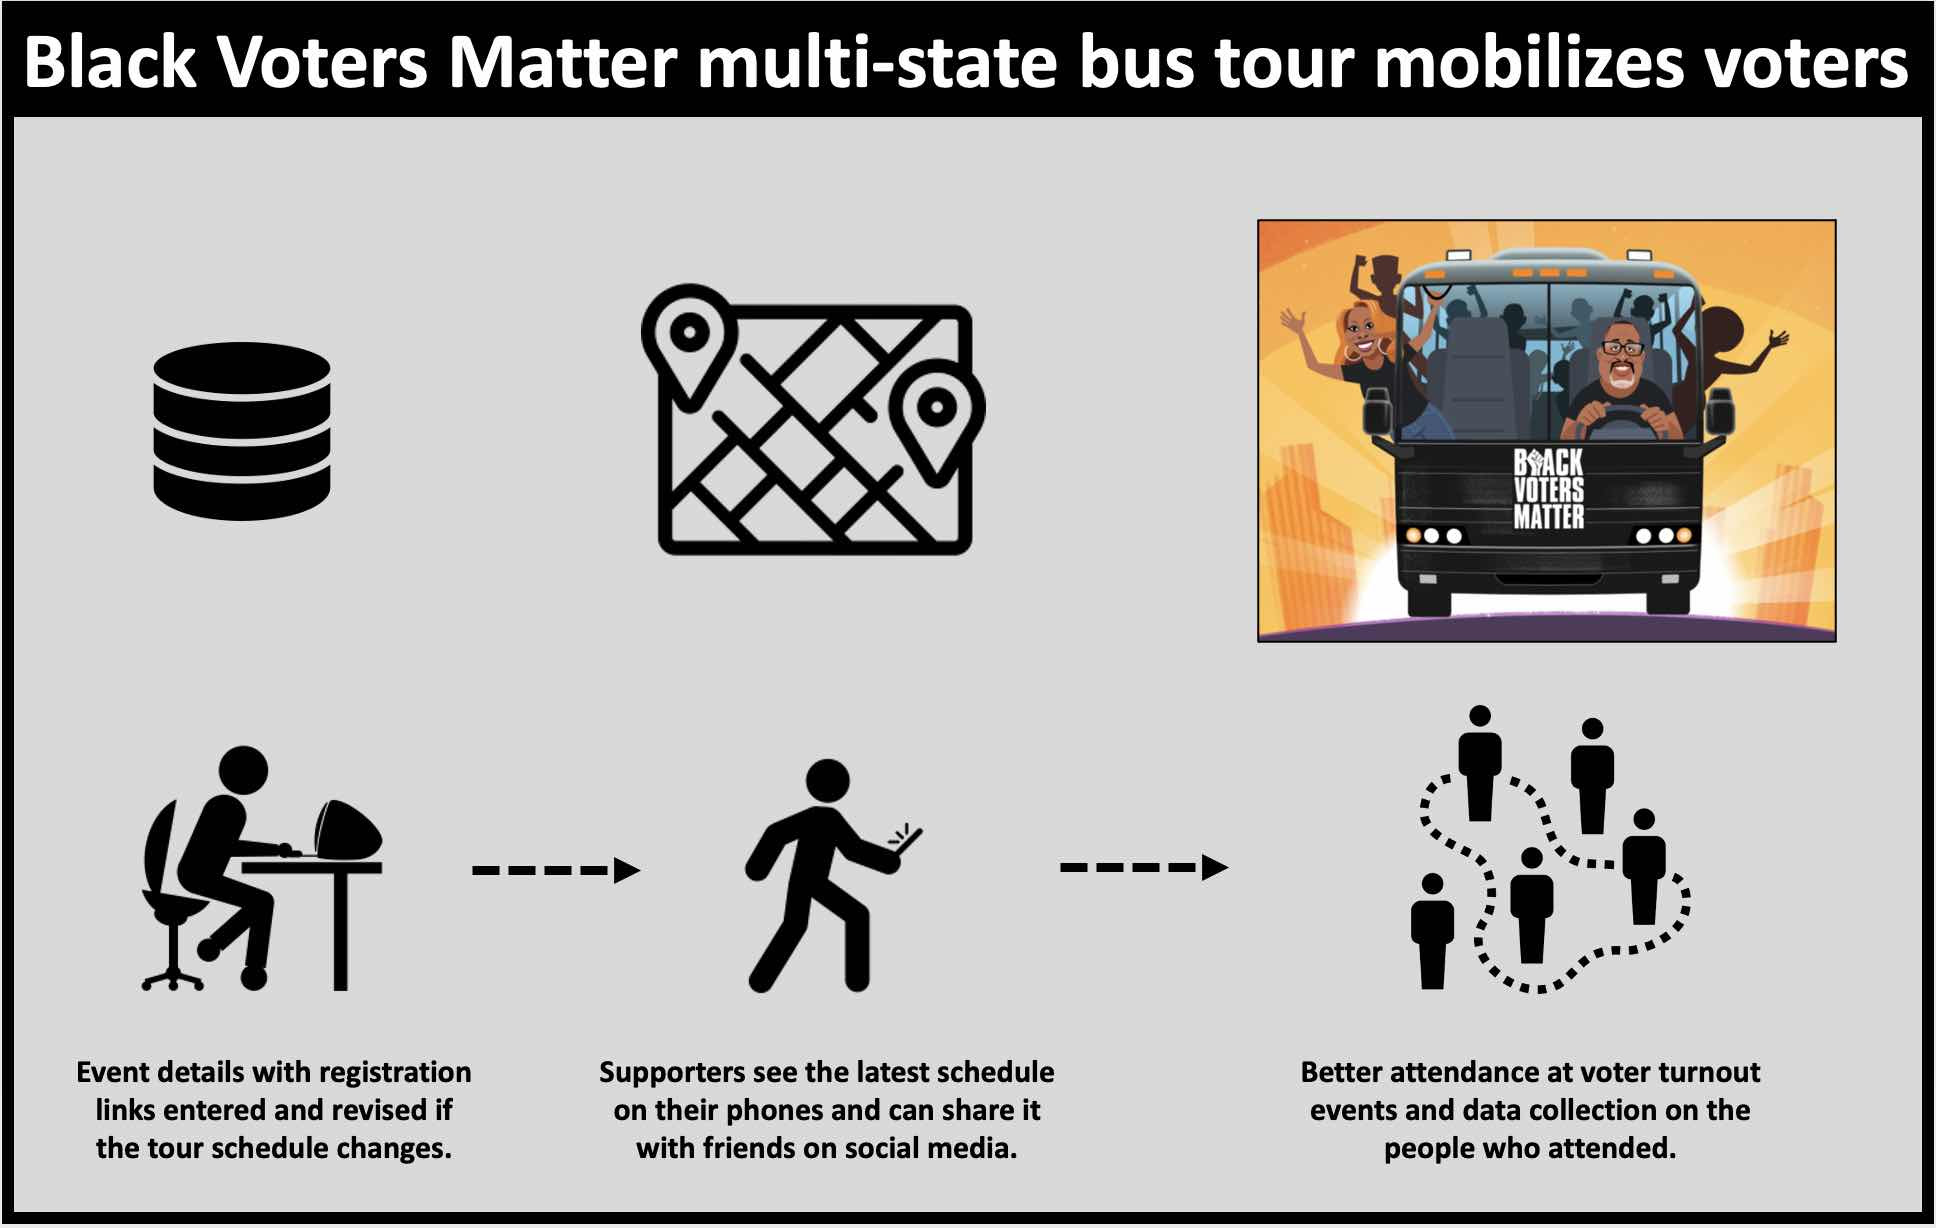 Black Voters Matter uses technology to increase turnout at their bus tour stops